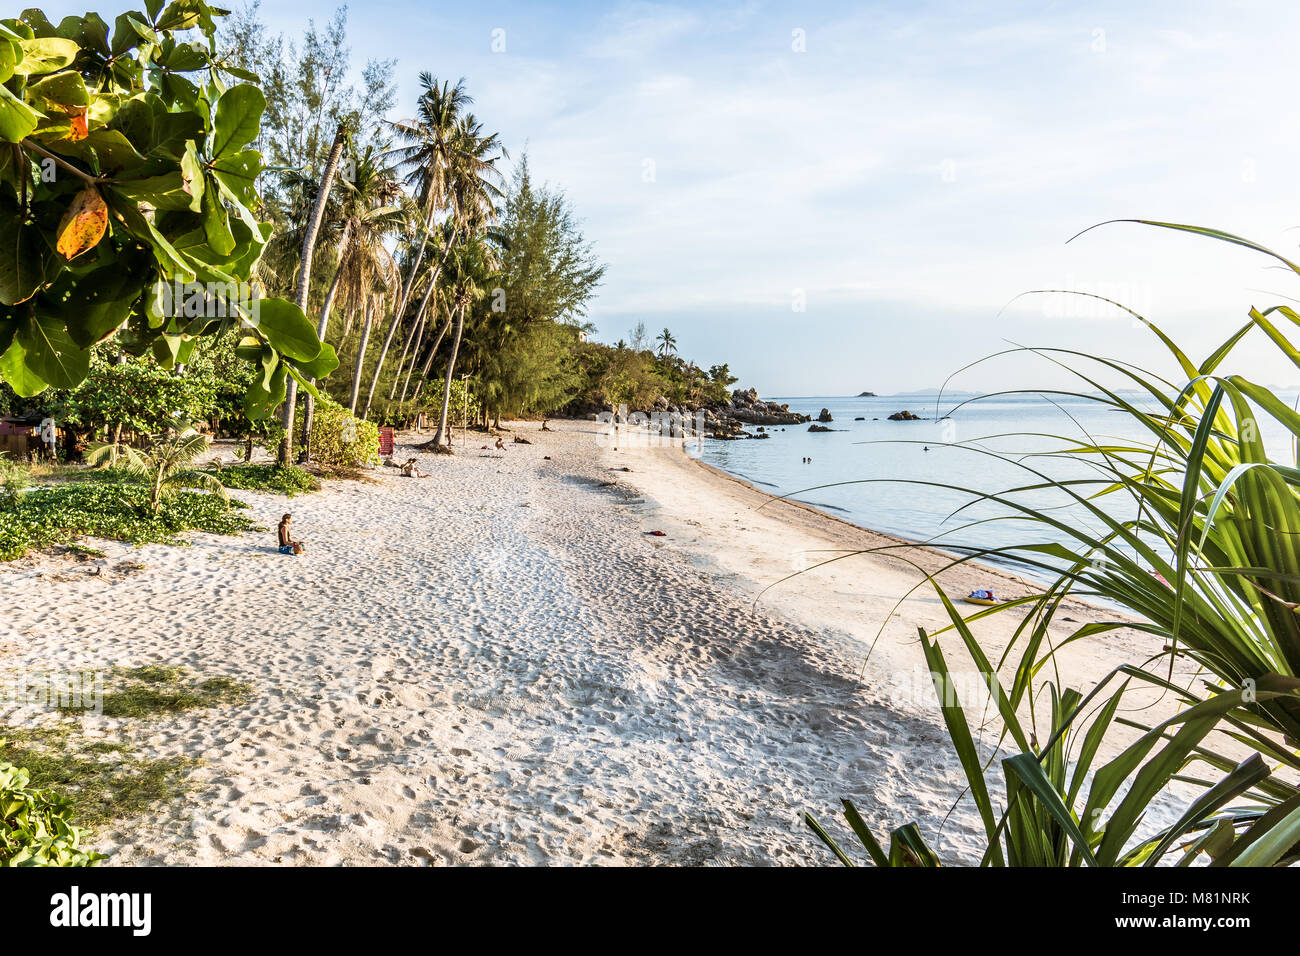 Paradise beach with som peple relaxing in the lateafternoon sunshine. Secret Beach, Haad Son, Koh Pangan, Thailand, May 8, 2016, Stock Photo